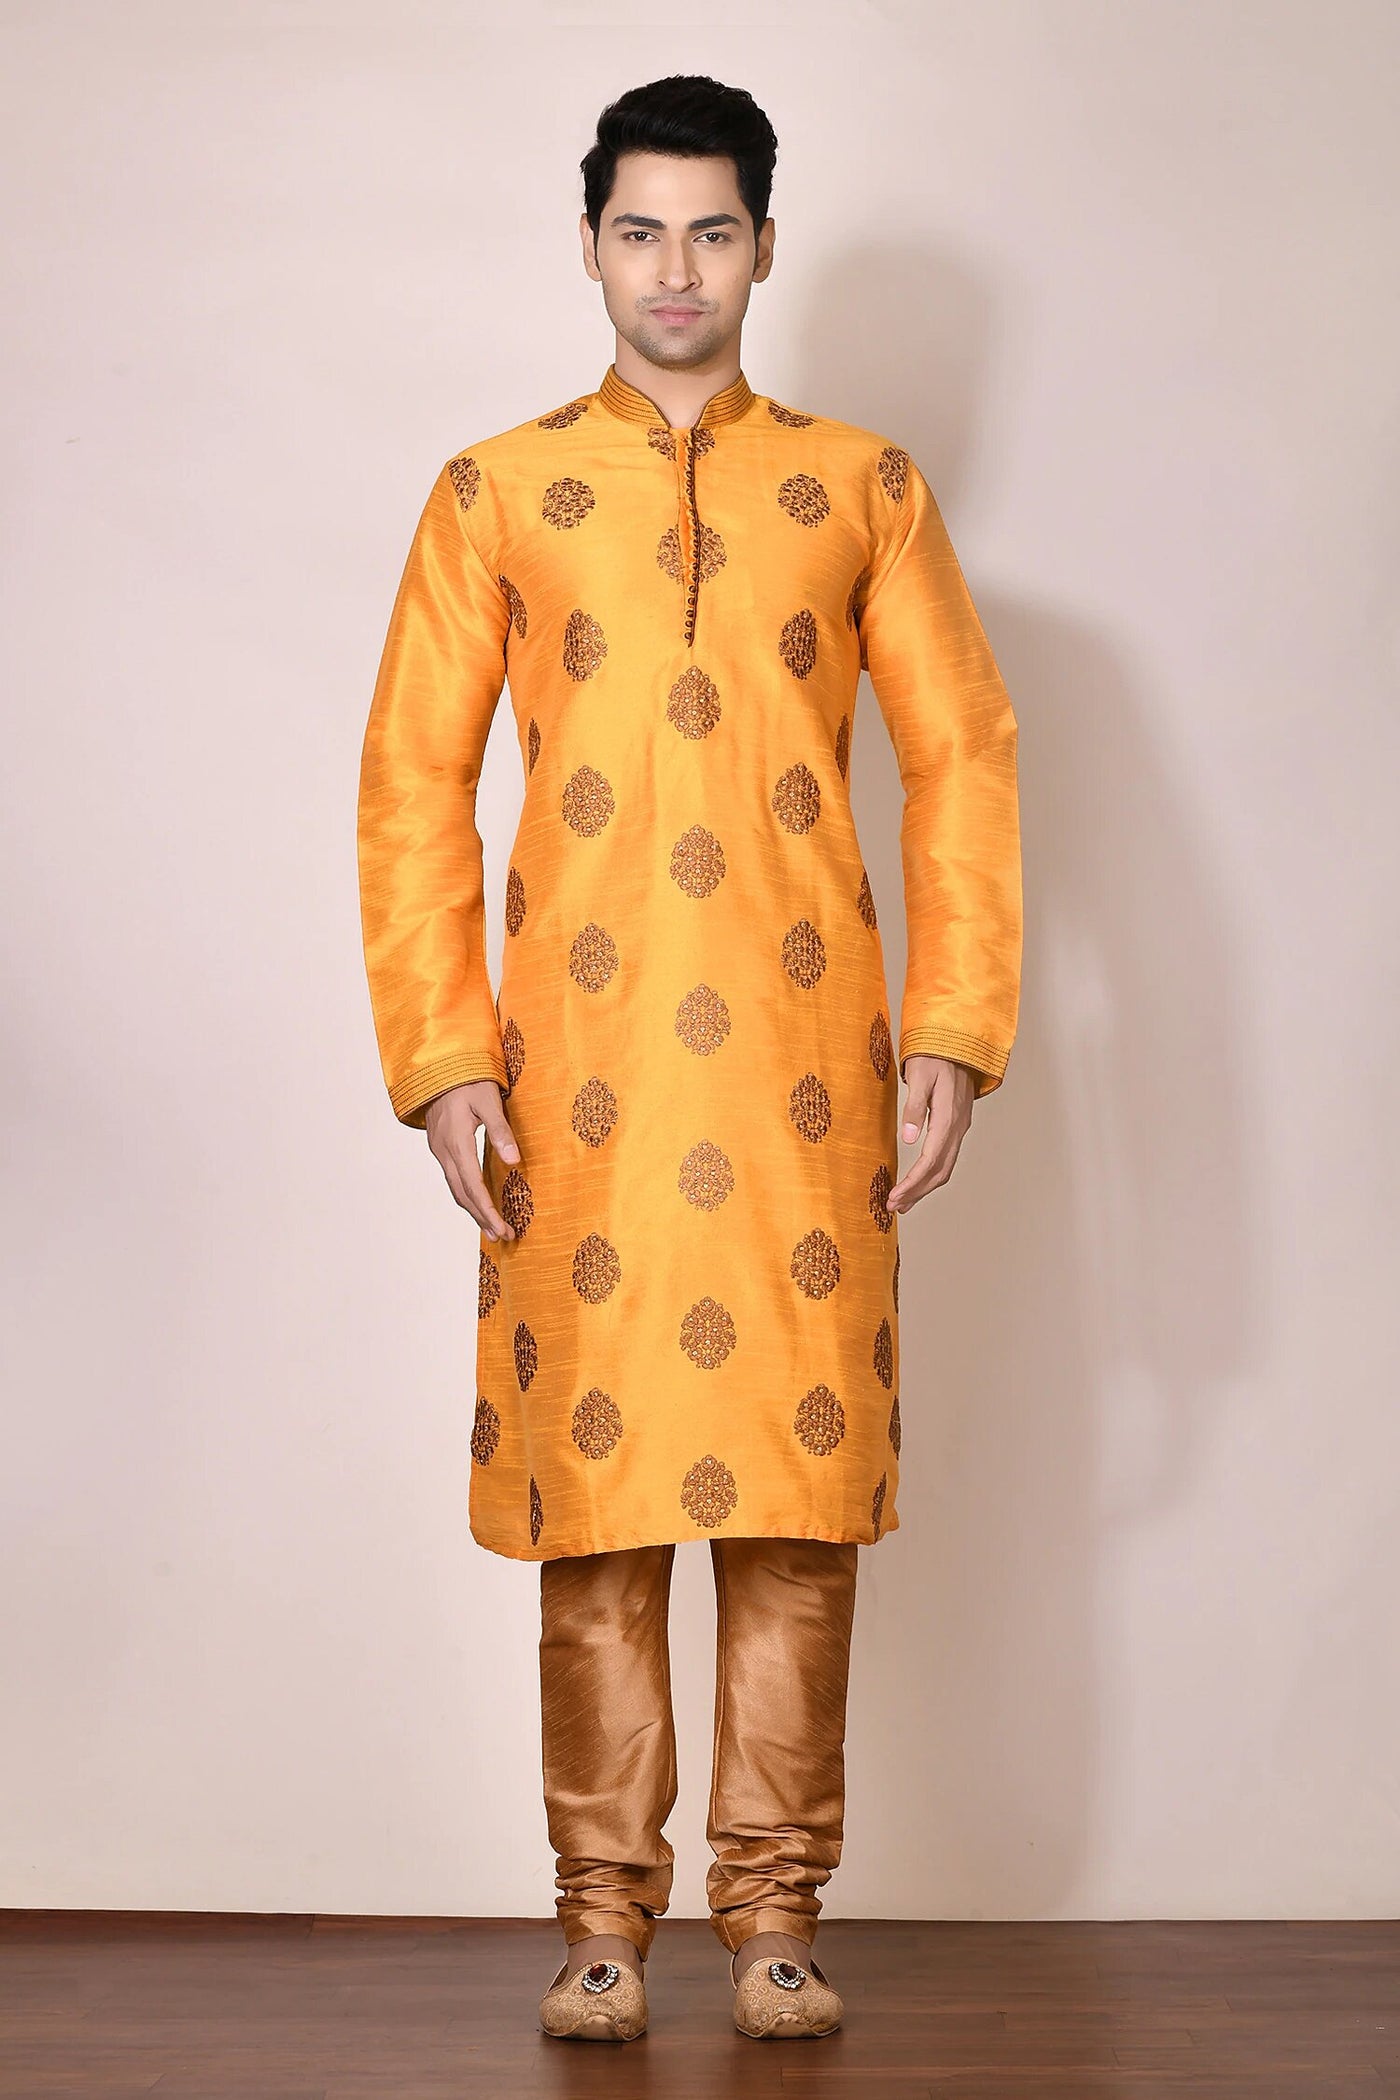 Orange Kurta Set Indian Clothing in Denver, CO, Aurora, CO, Boulder, CO, Fort Collins, CO, Colorado Springs, CO, Parker, CO, Highlands Ranch, CO, Cherry Creek, CO, Centennial, CO, and Longmont, CO. NATIONWIDE SHIPPING USA- India Fashion X